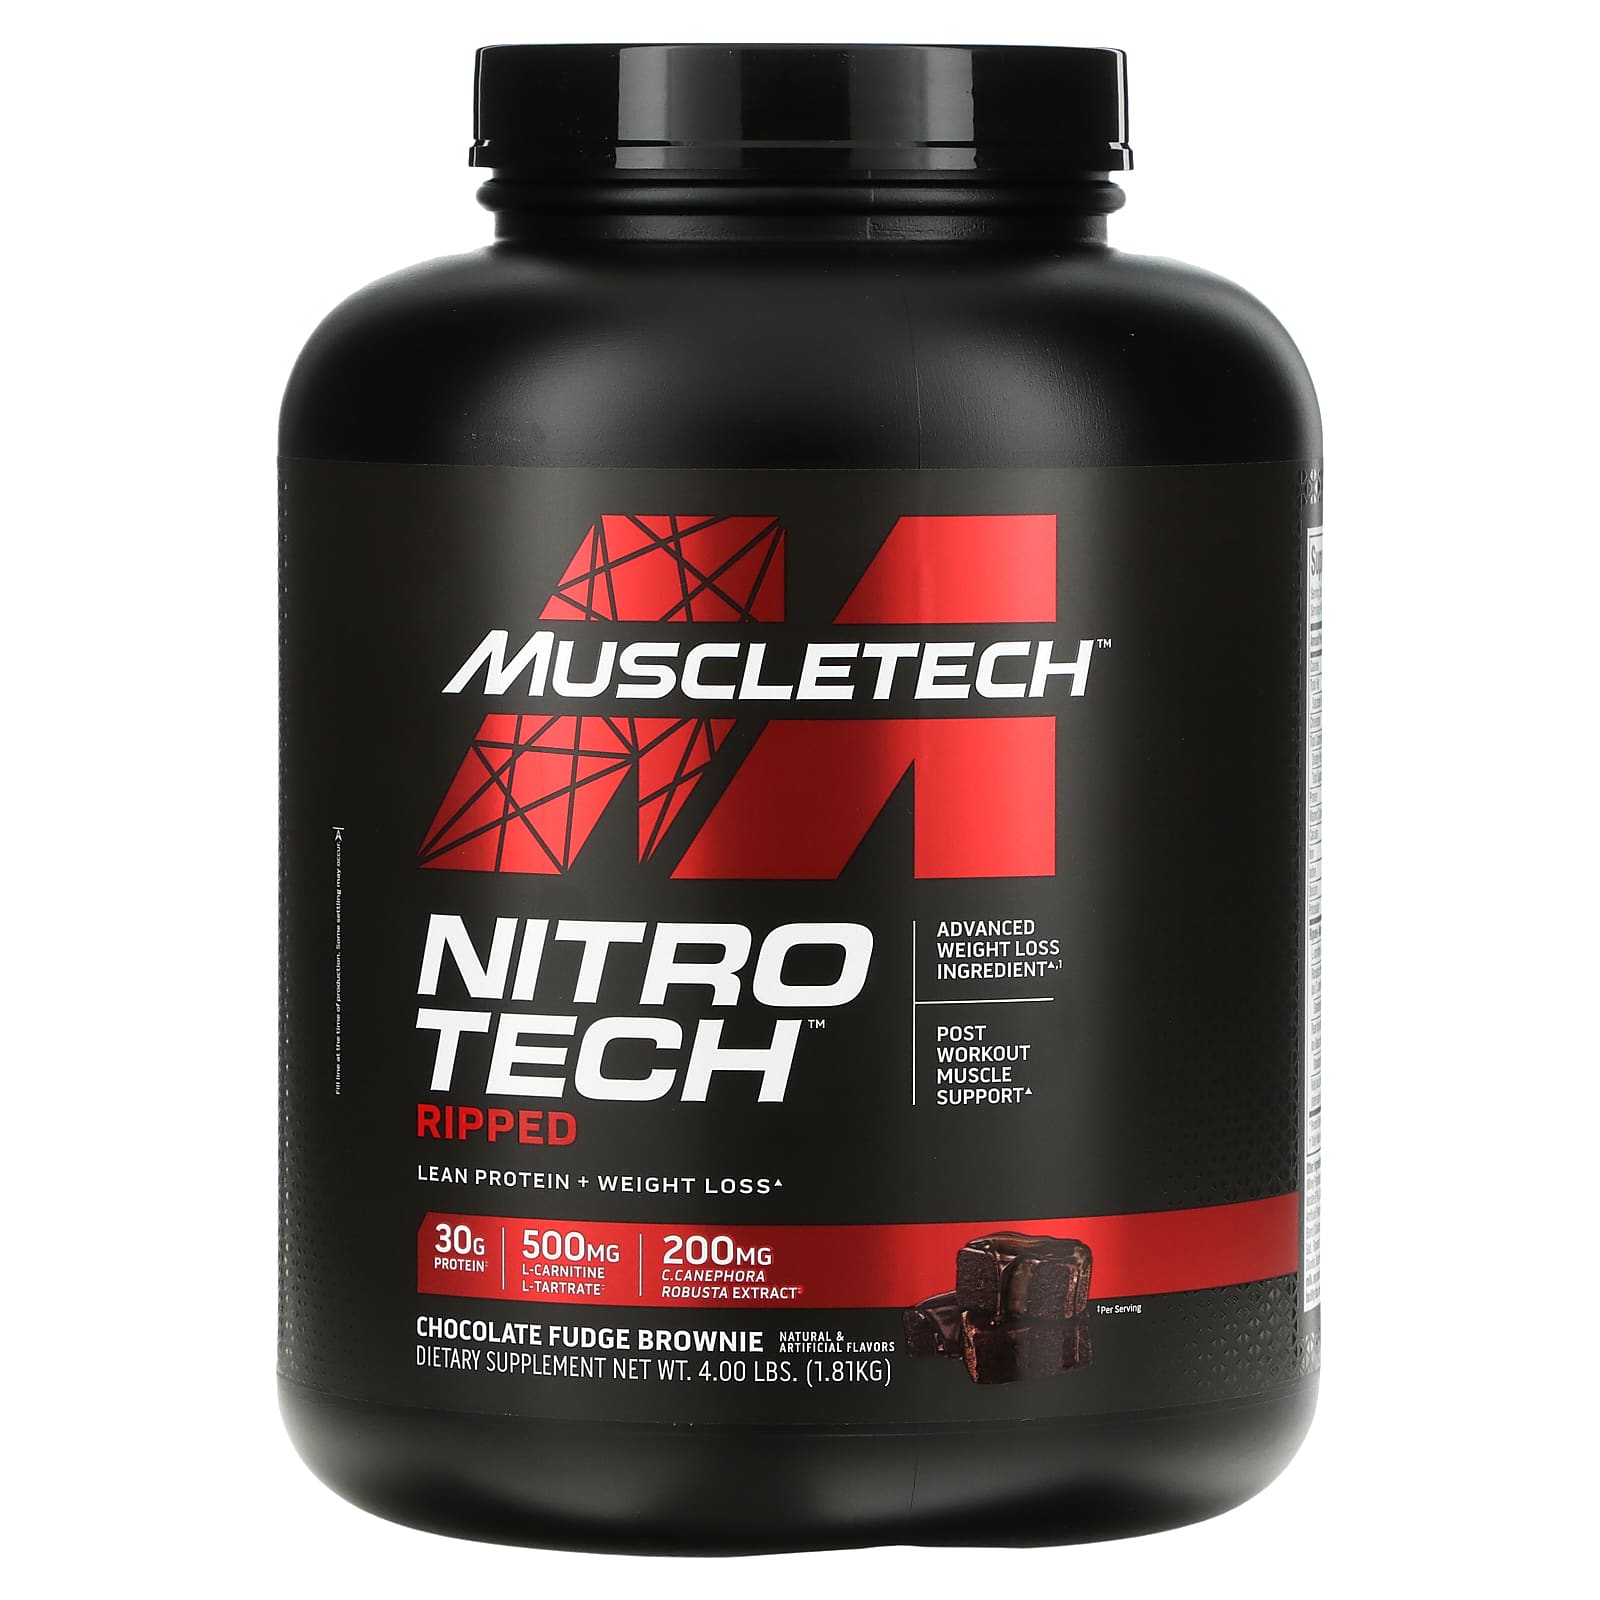 Nitro Tech Ripped - Lean Protein + Weight Loss - Chocolate Fudge Brownie - 4 lbs (1.81 kg) - MuscleTech